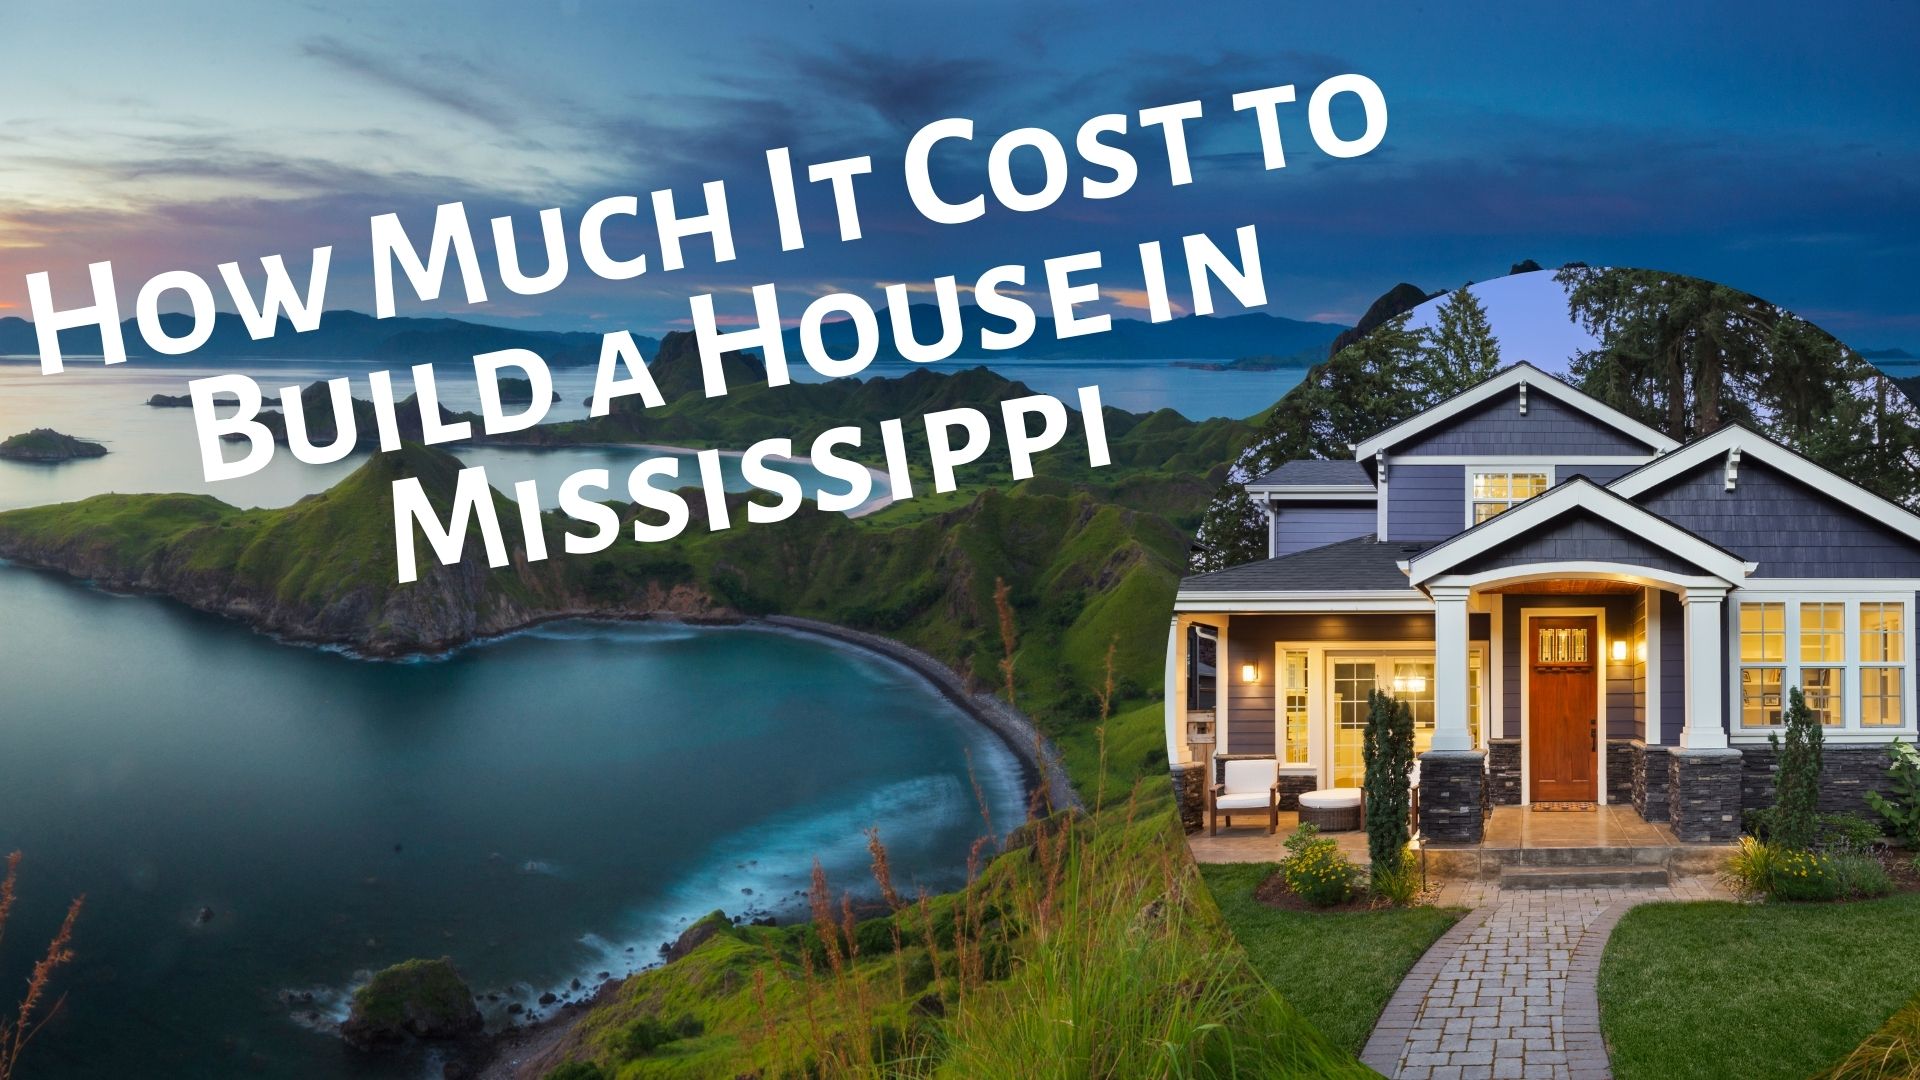 How Much It Cost to Build a House in Mississippi